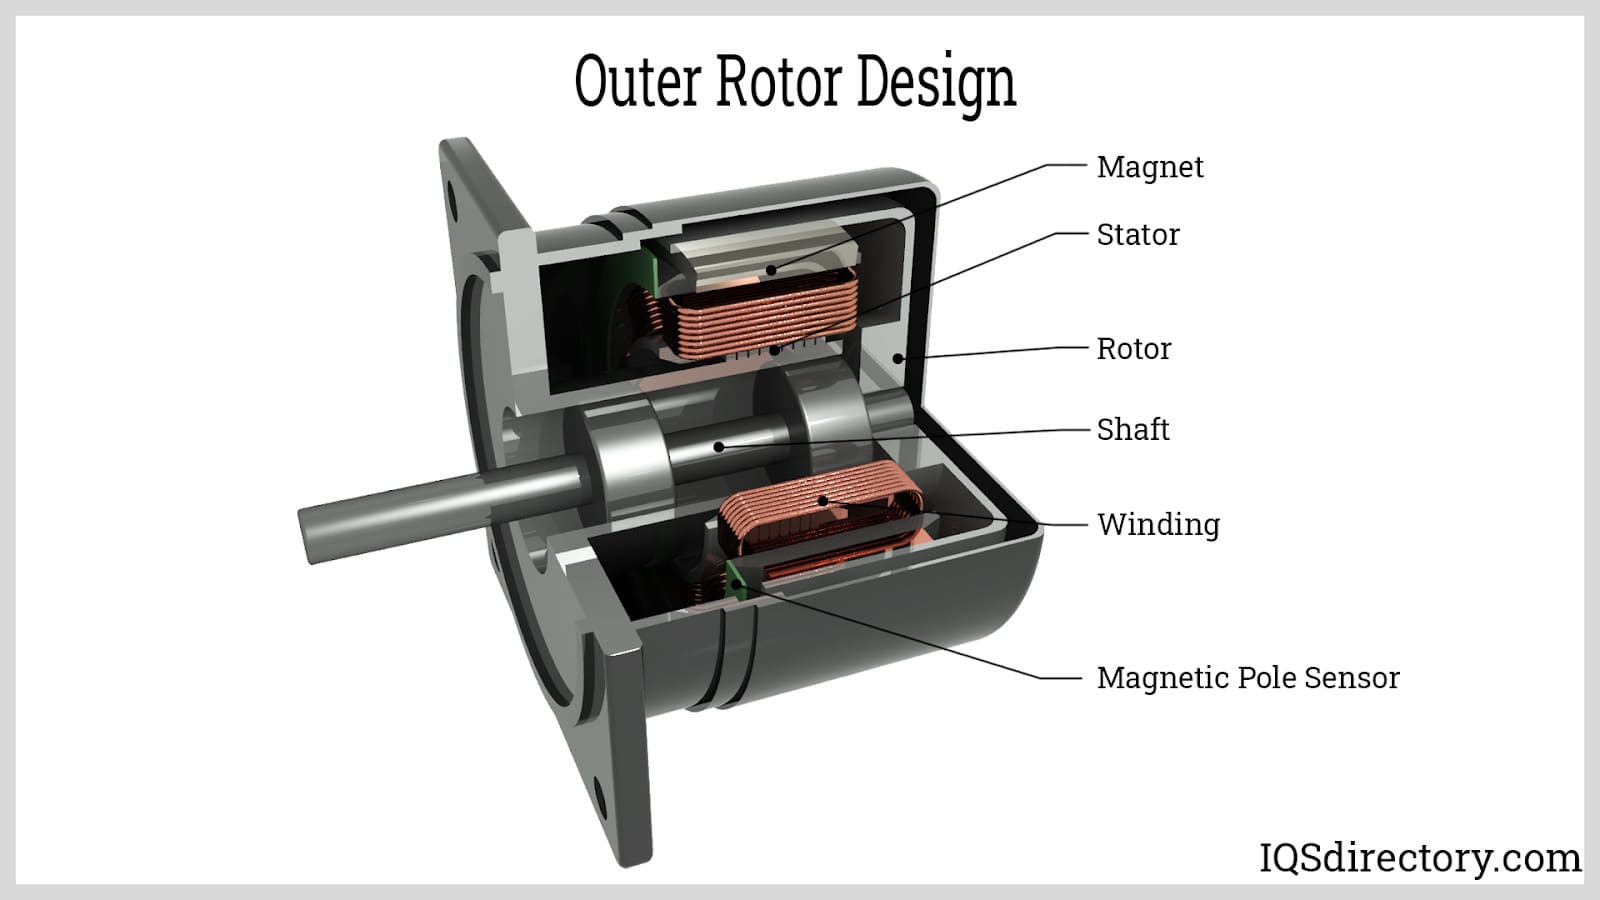 Outer Rotor Design